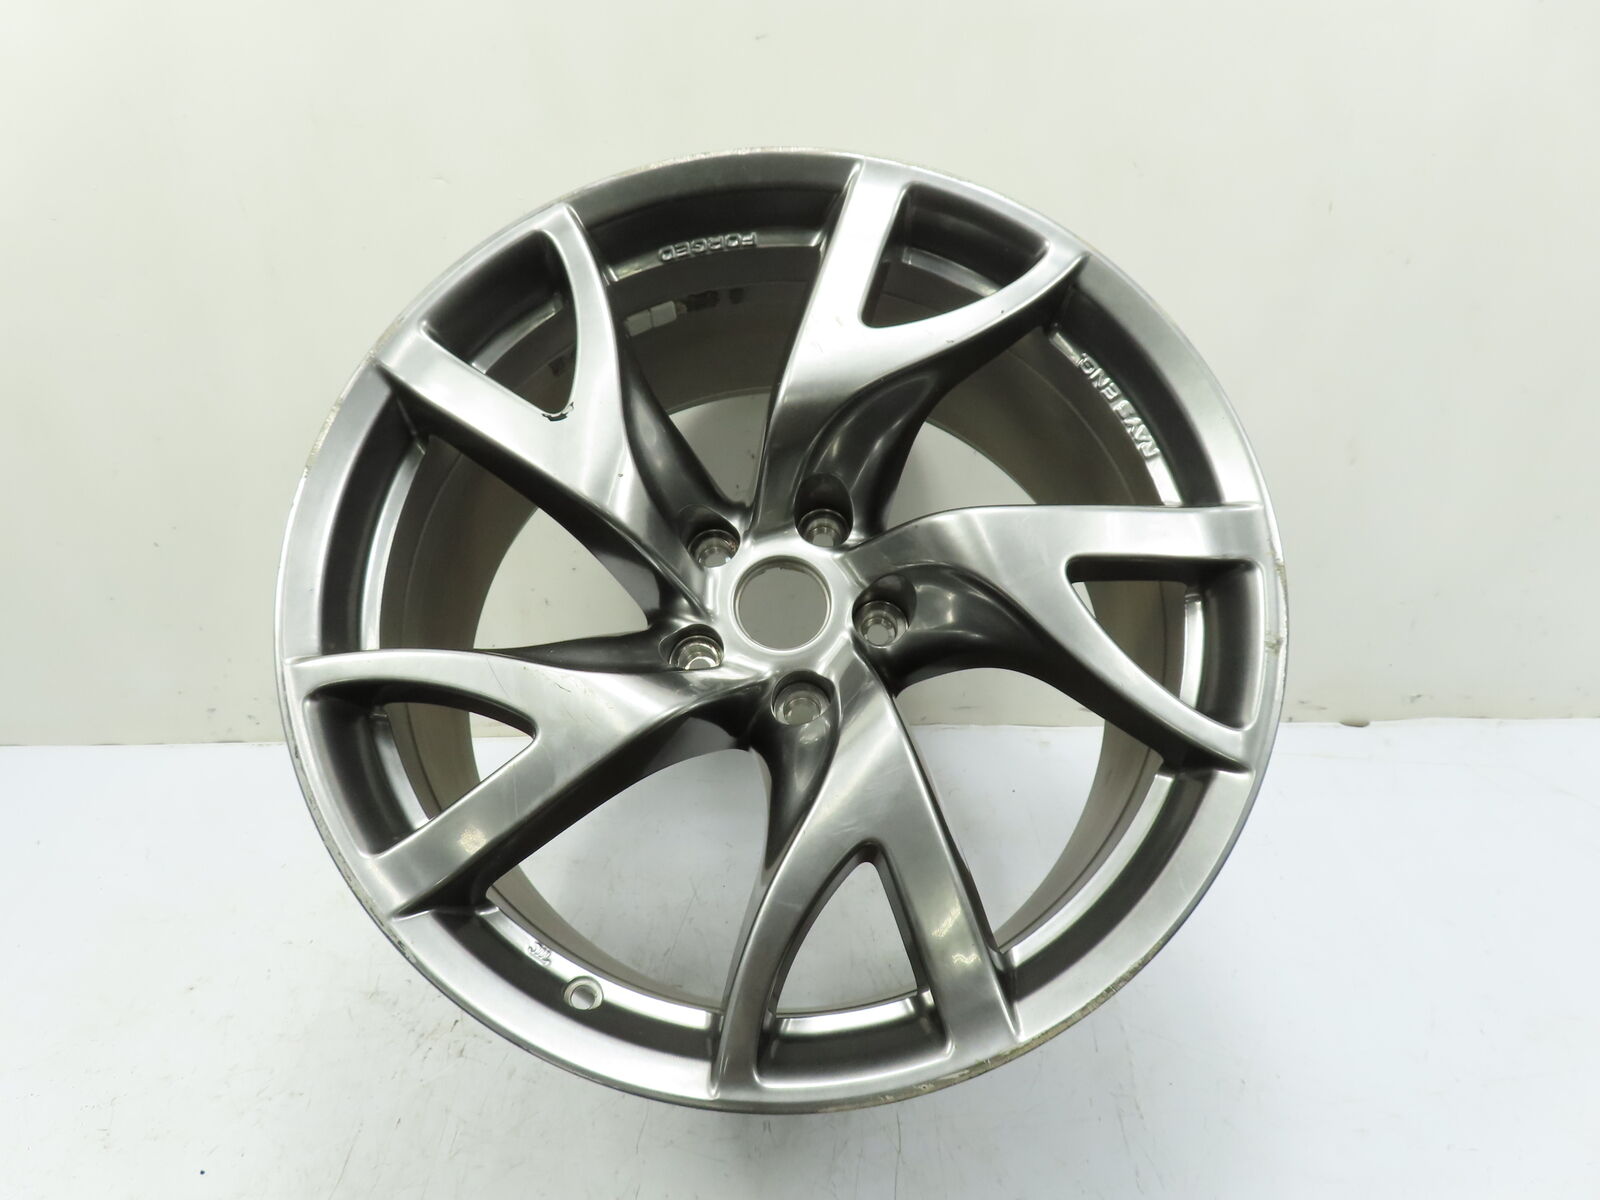 15 Nissan 370Z Convertible #1257 Wheel, Rays Forged Rim Staggard Rear 19x10